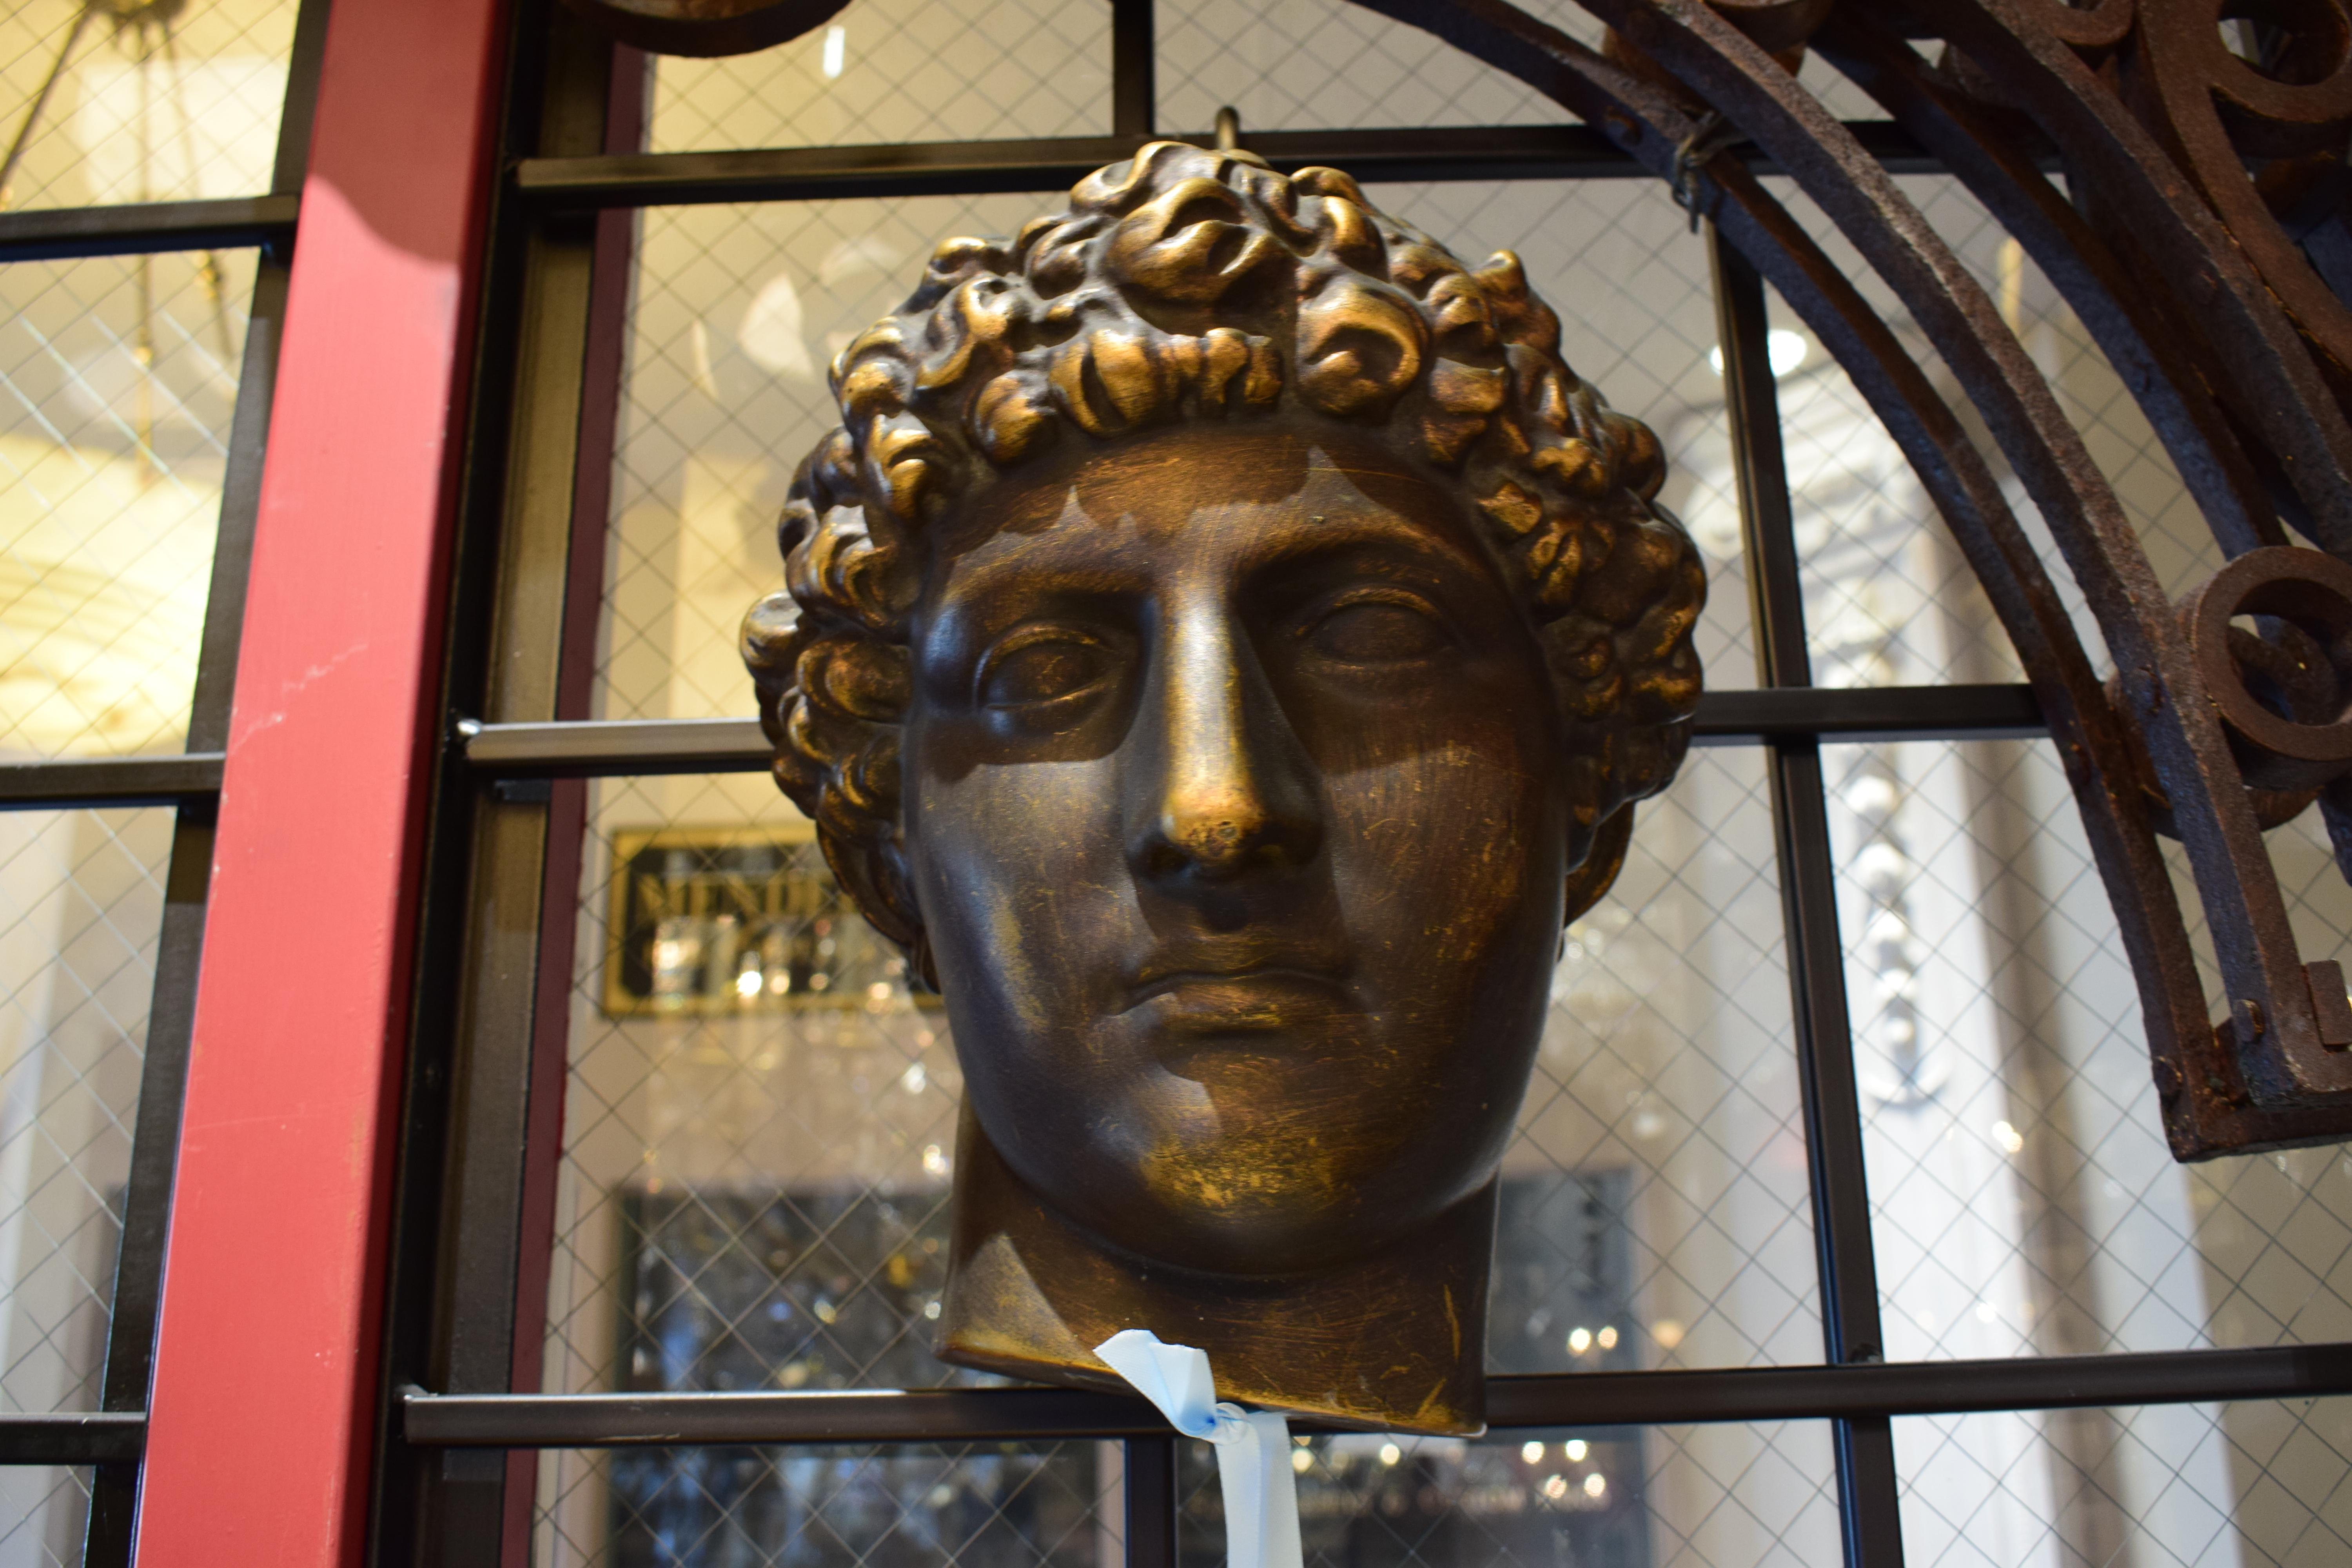 A fine sculpture of Apollo, ceramic with a metal like finish.
Dimensions: Height 12